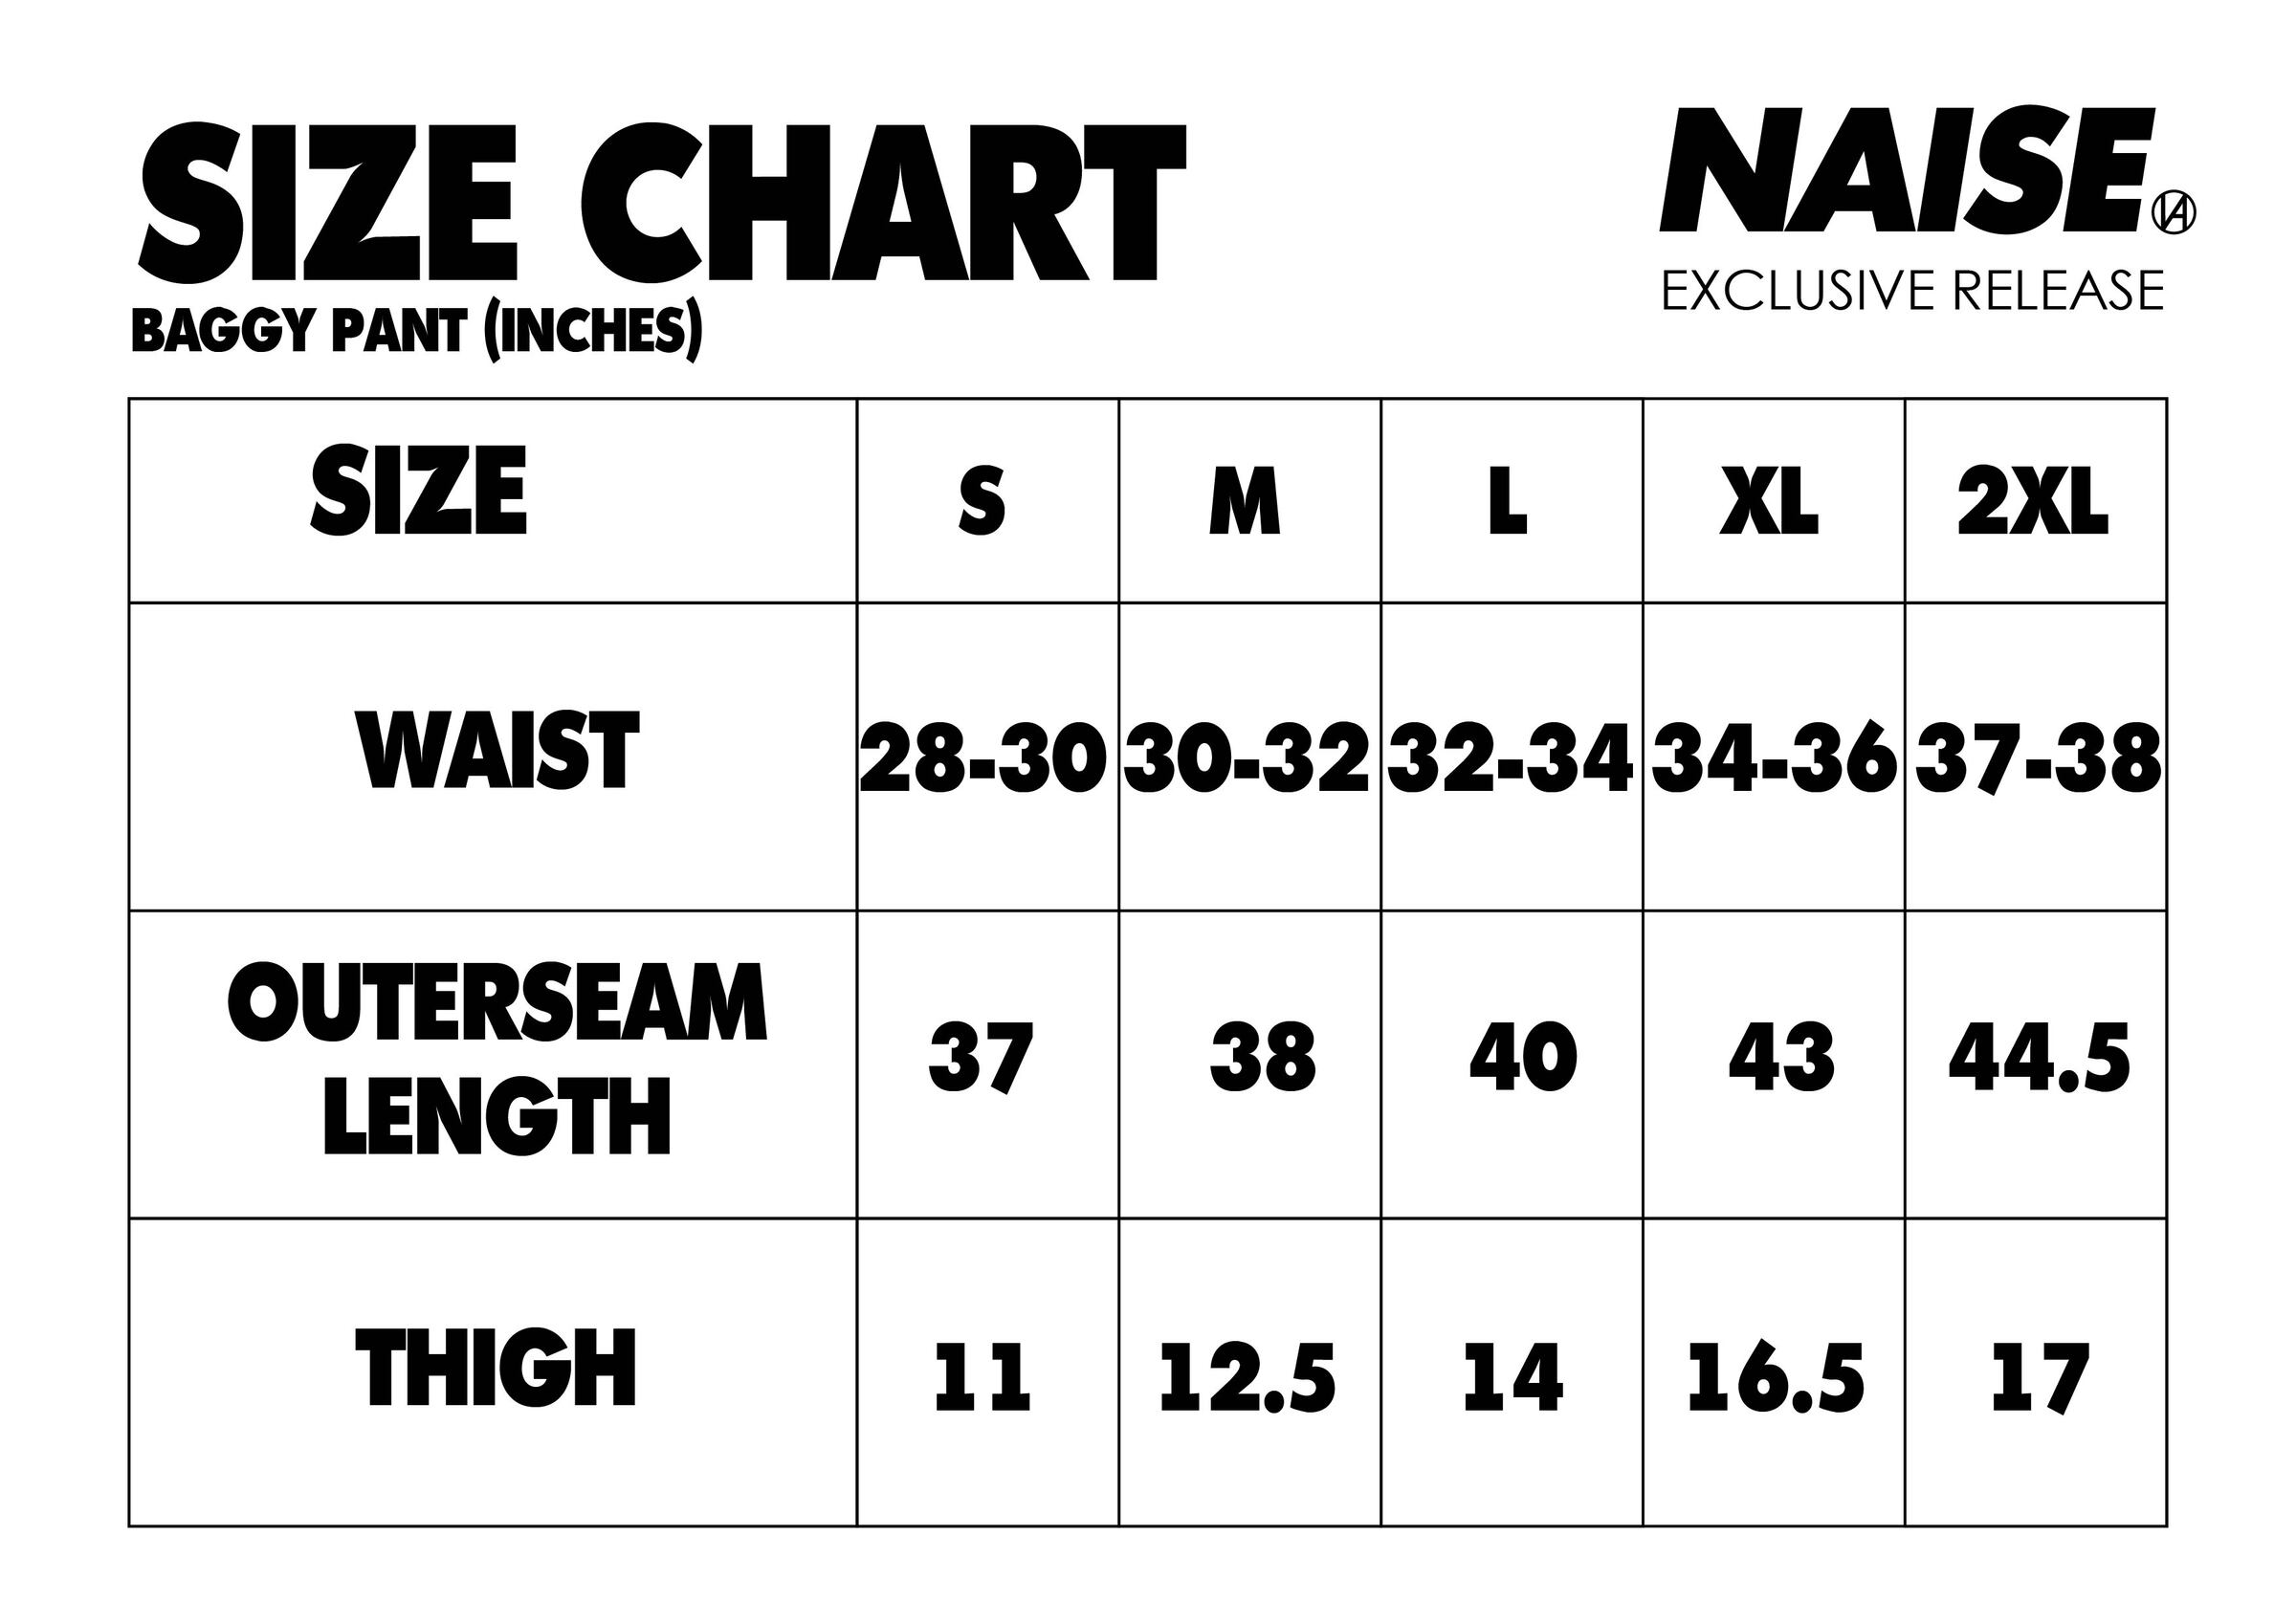 SIZE CHART BAGGY PANT